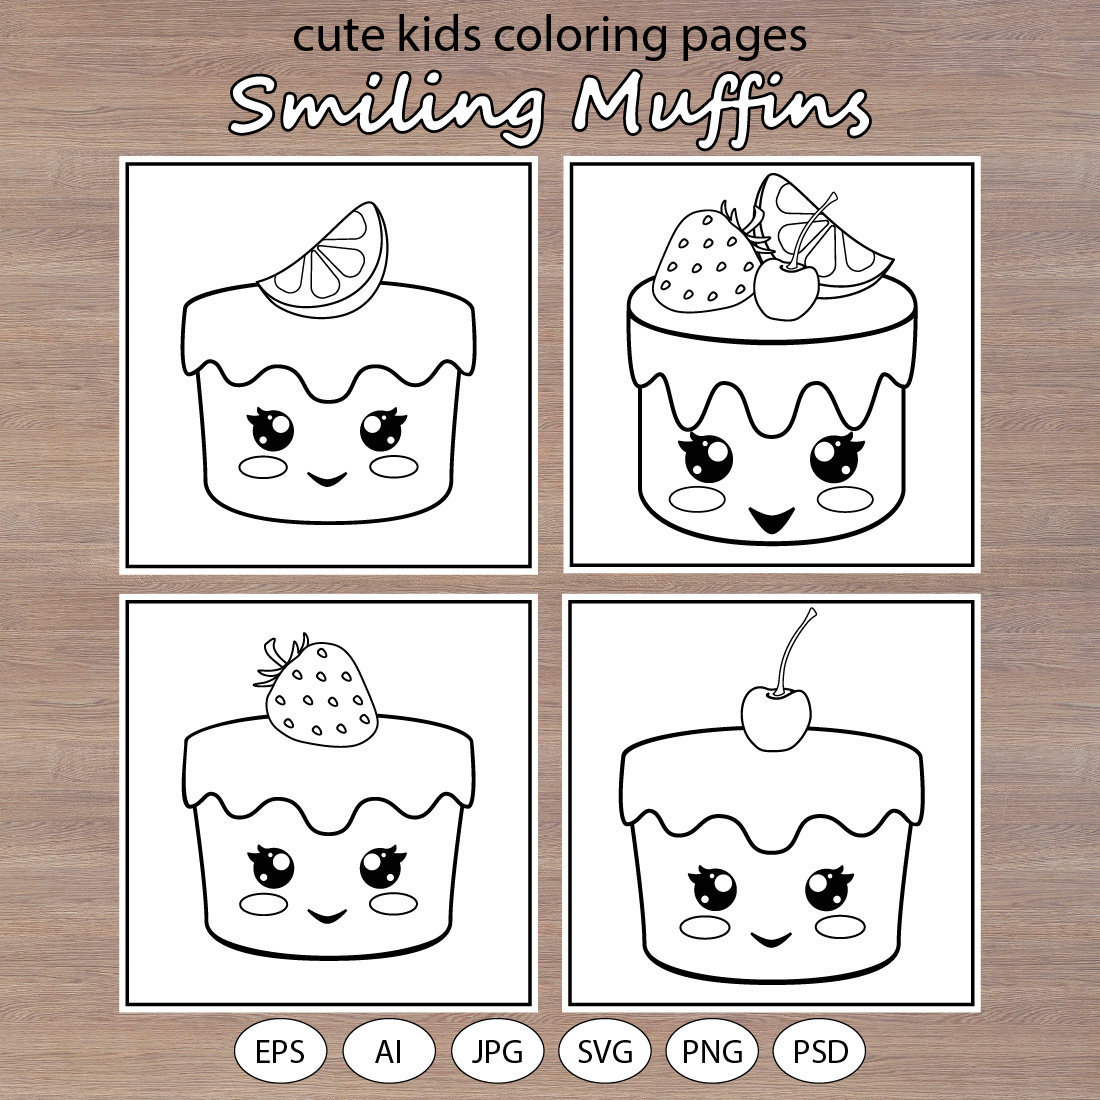 Cute Smiling Muffins - Coloring Pages cover image.